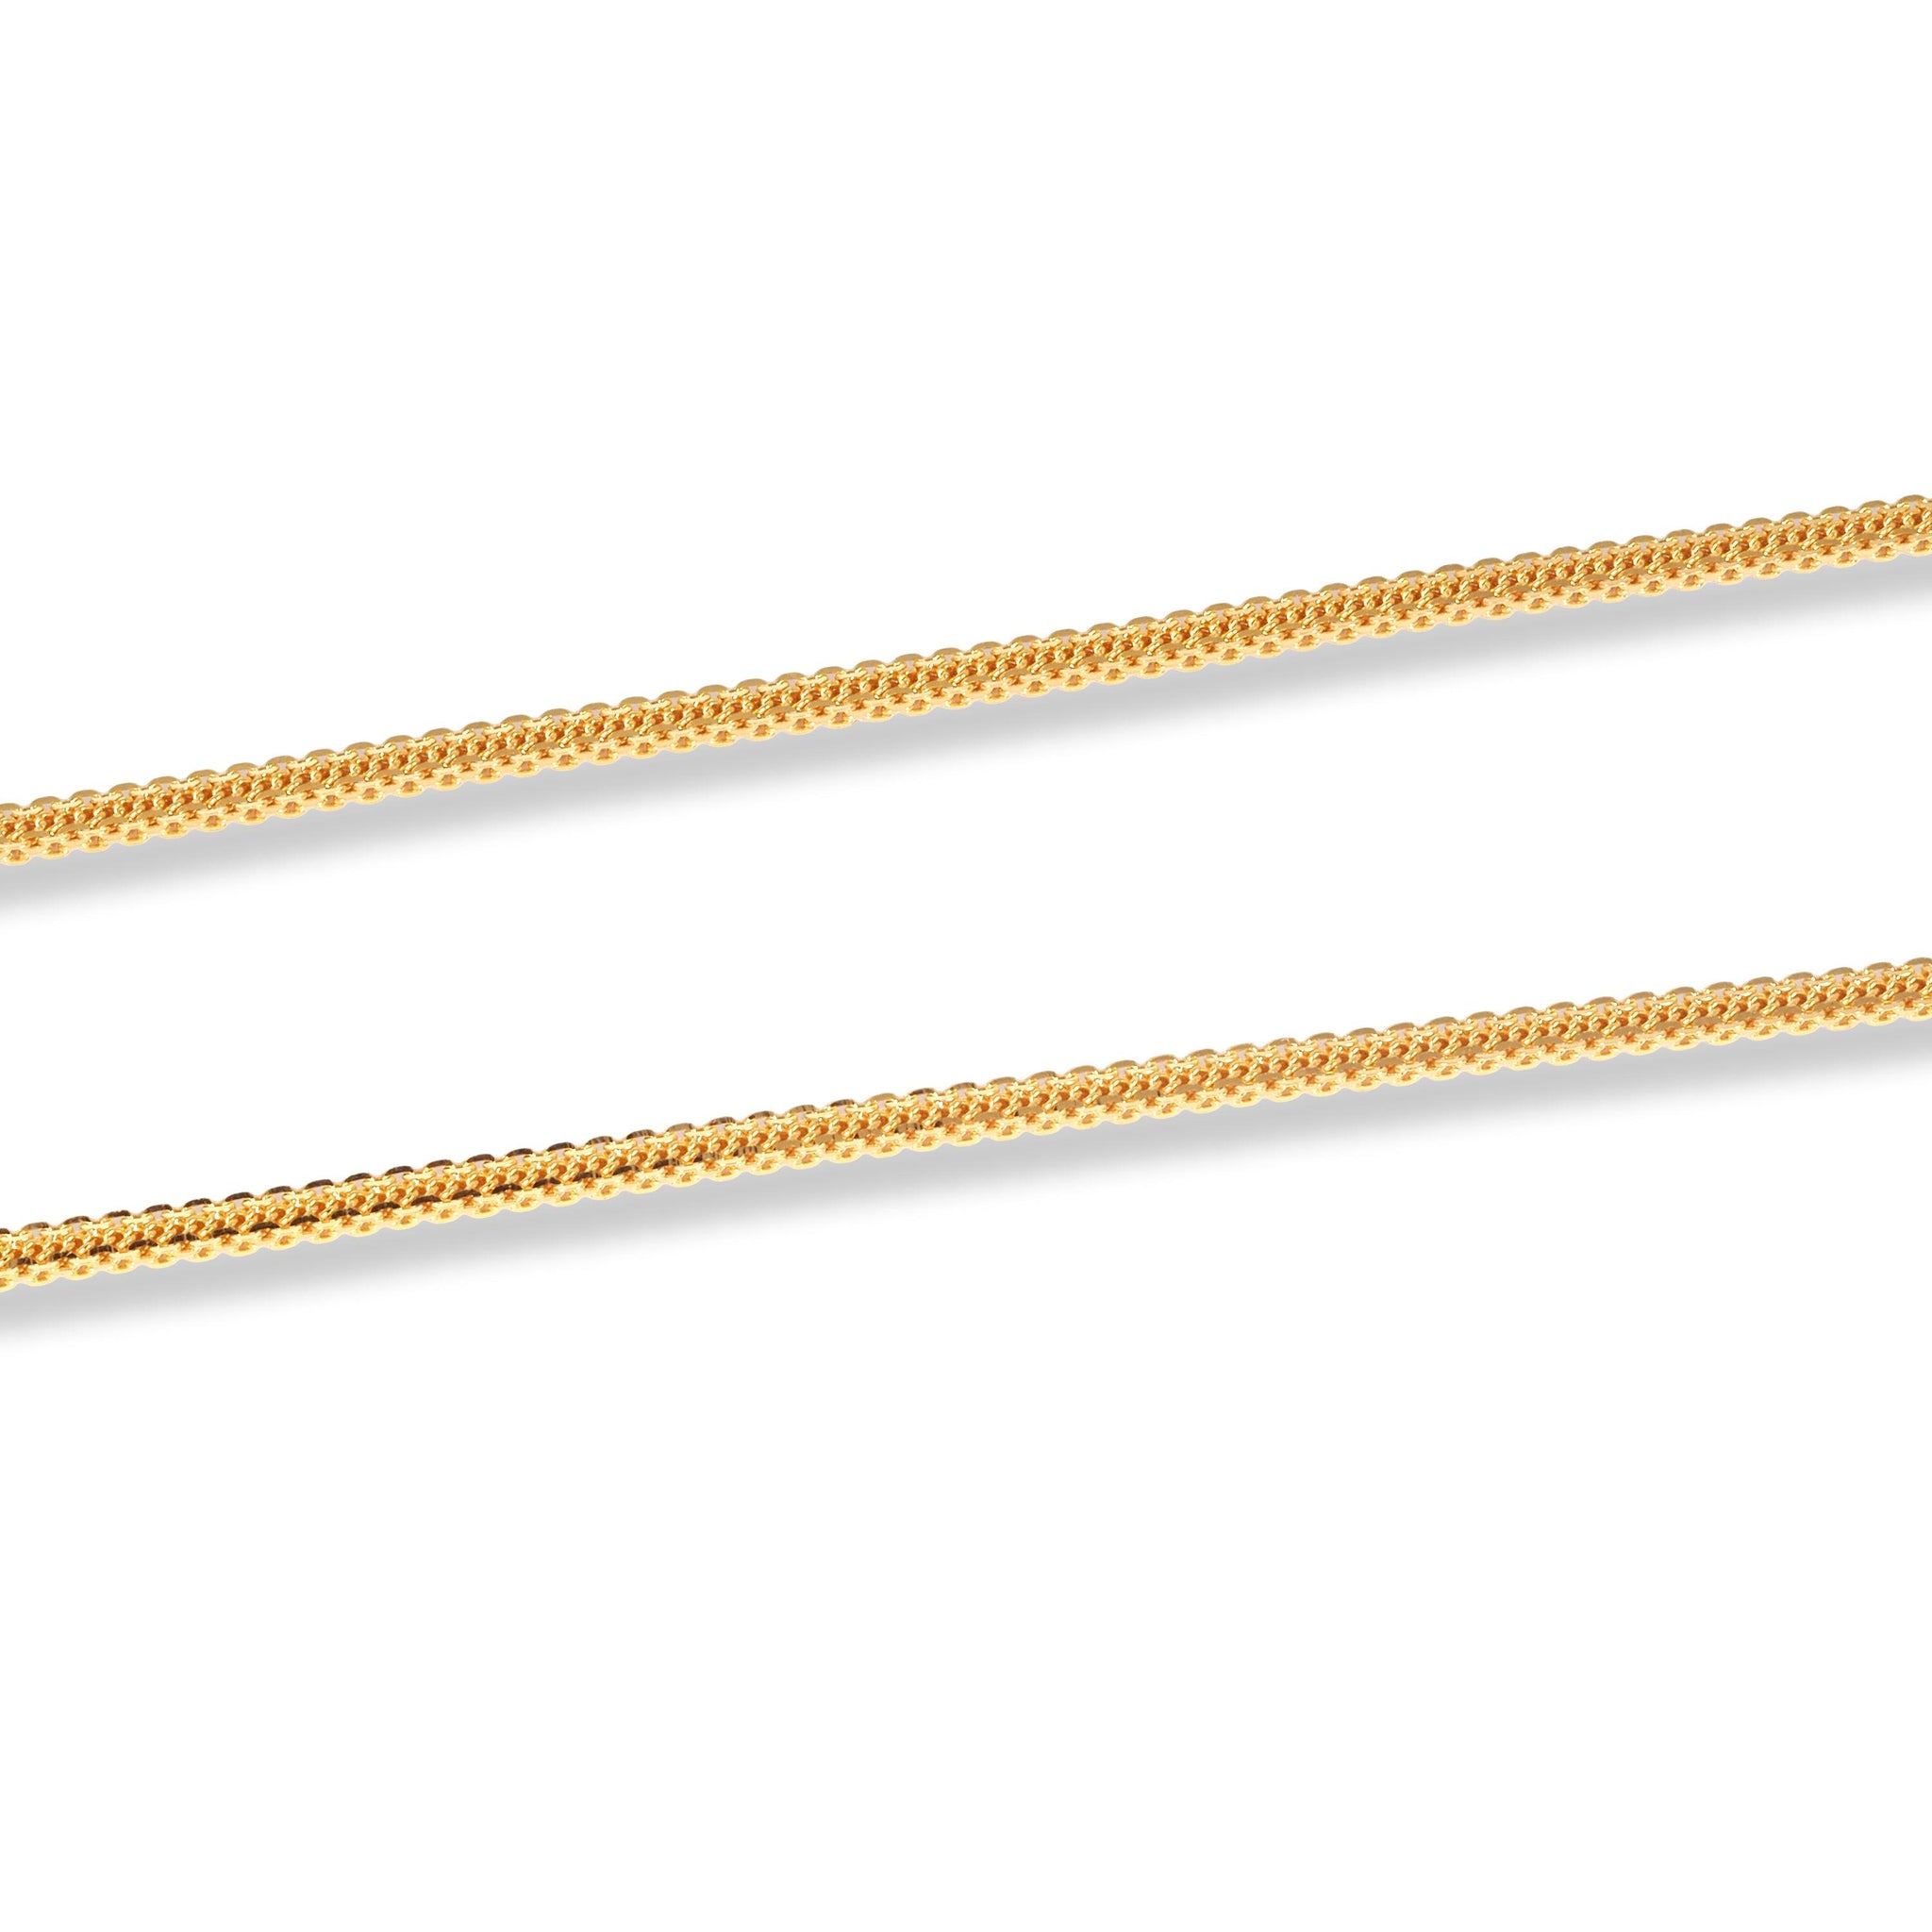 22ct Gold Fancy Dovetail Chain with Lobster Clasp C-7134